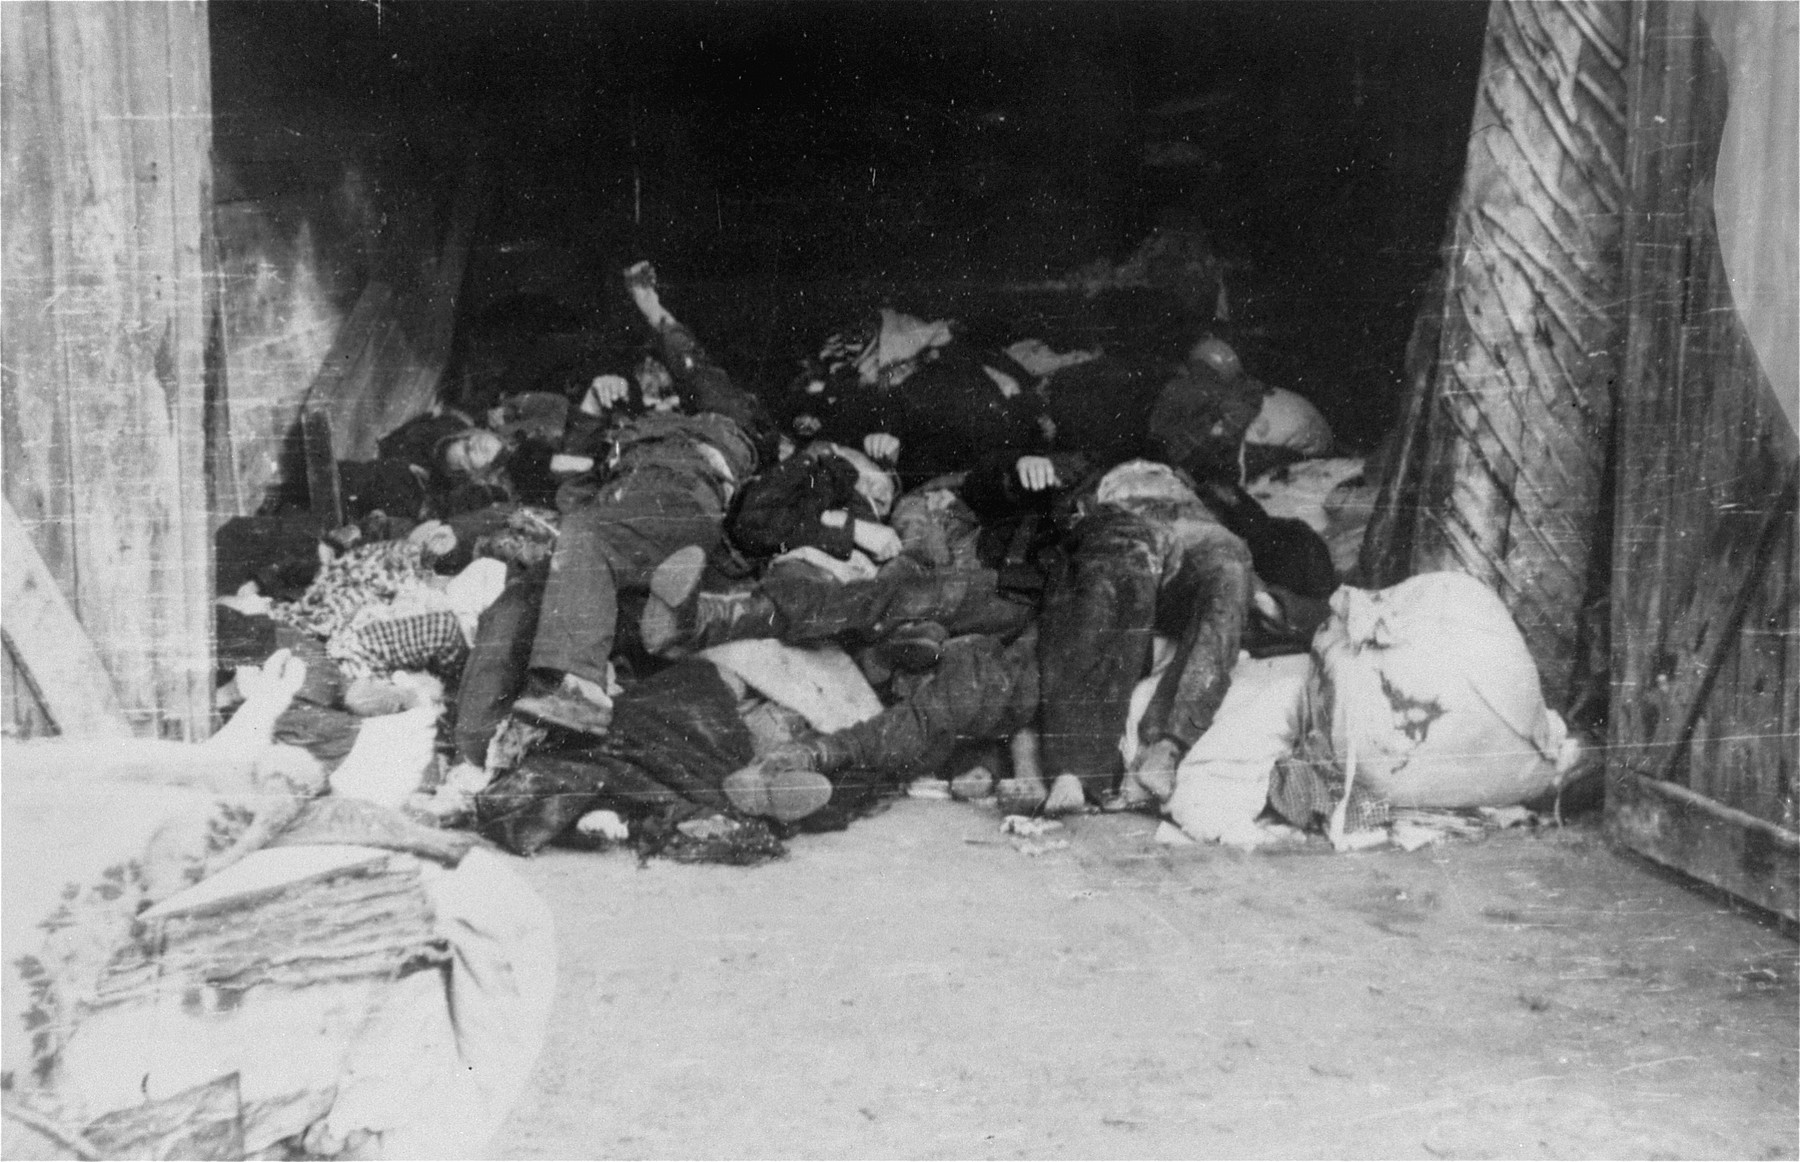 The corpses of Jews are piled up in a barn in the Deblin Irena ghetto.

The corpses of those who were murdered in the ghetto during the expulsion Aktion to Sobibor were transported by cart to the Jewish cemetery in Bobrowniki.  [Source: Yad Vashem research notes.]